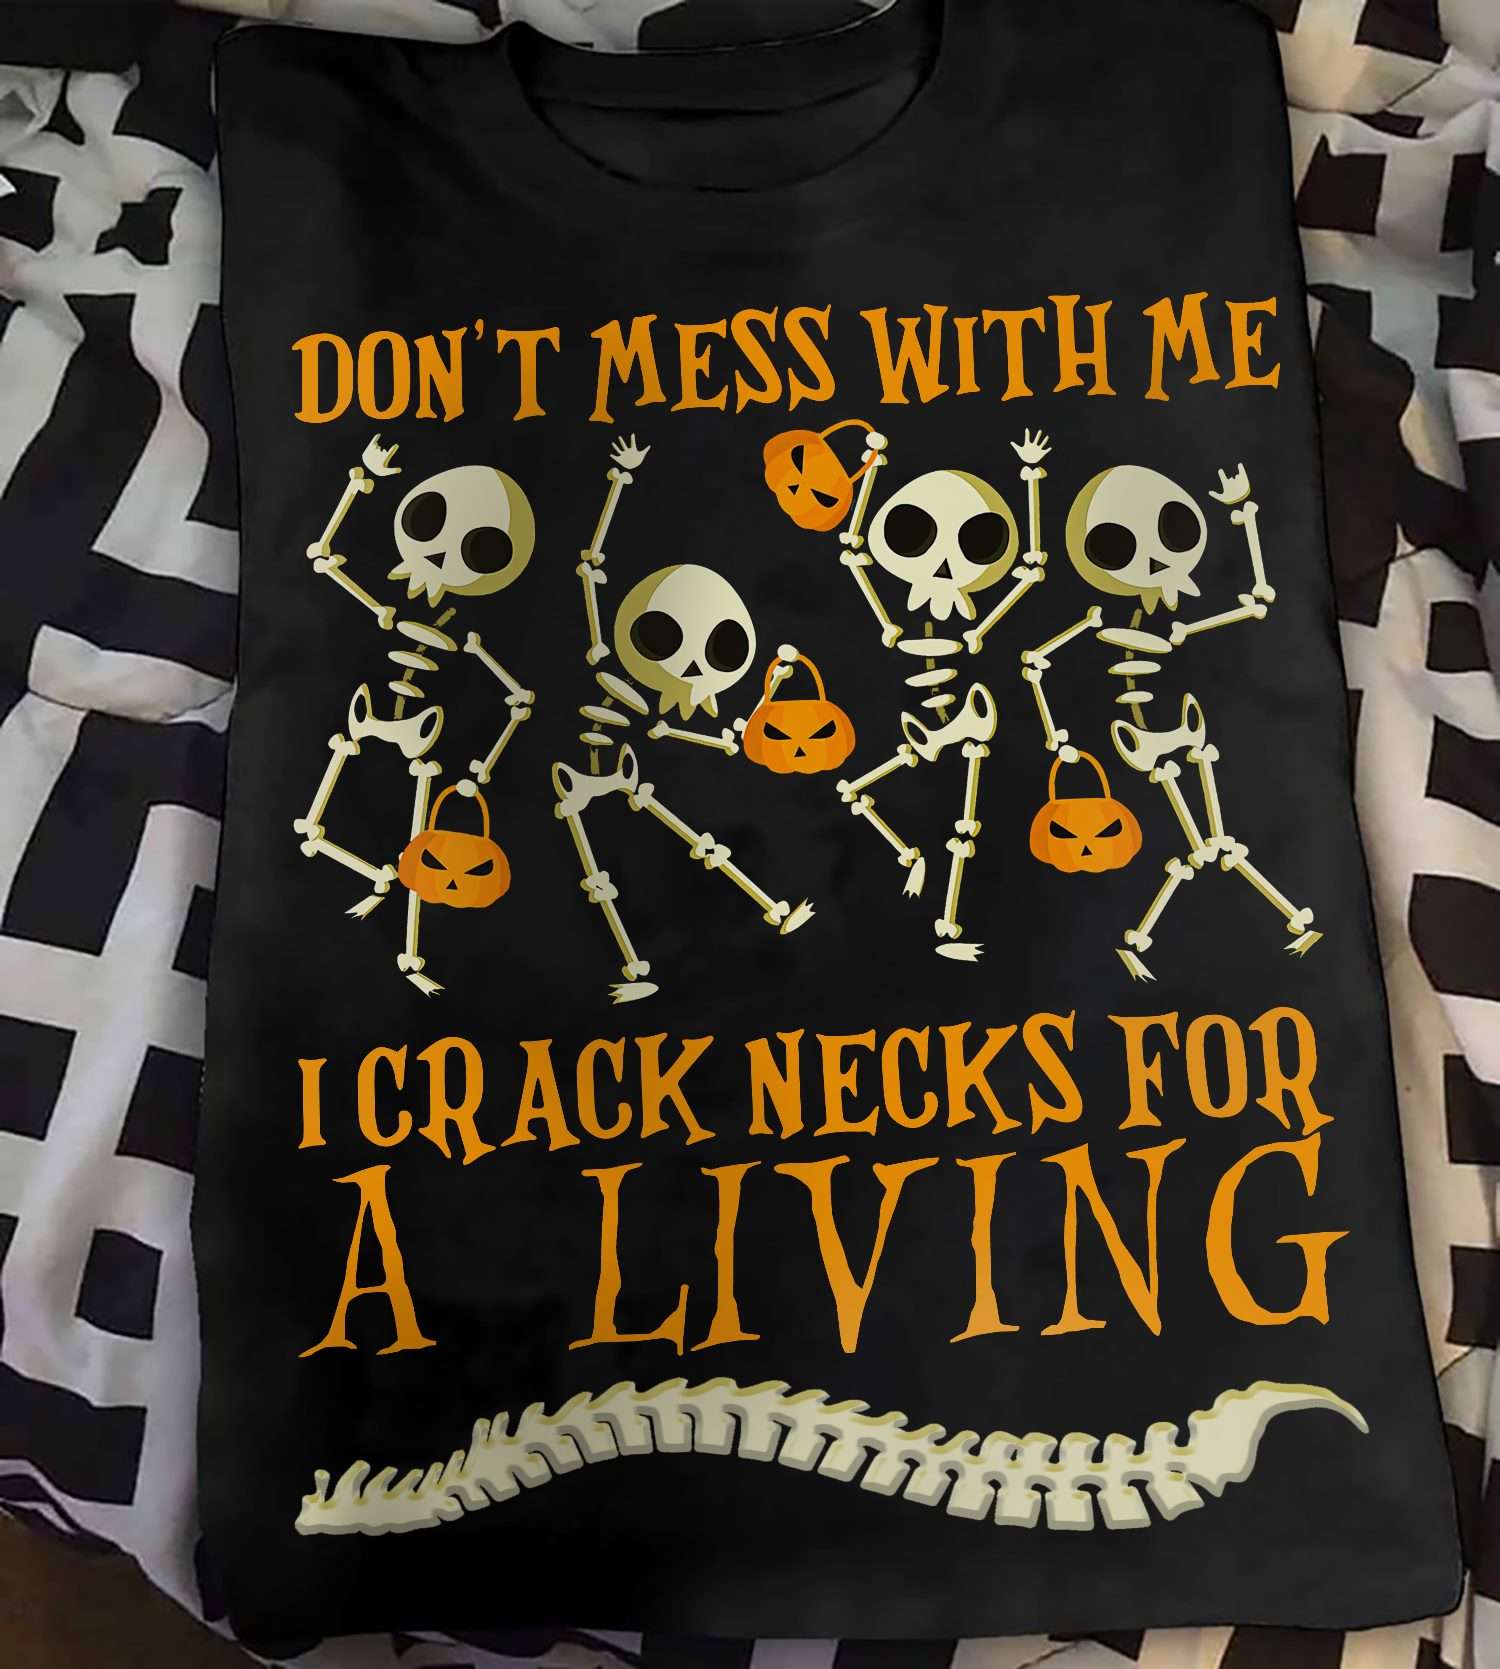 Don't mess with me T crack necks for a living - Halloween skull, skull and pumpkin